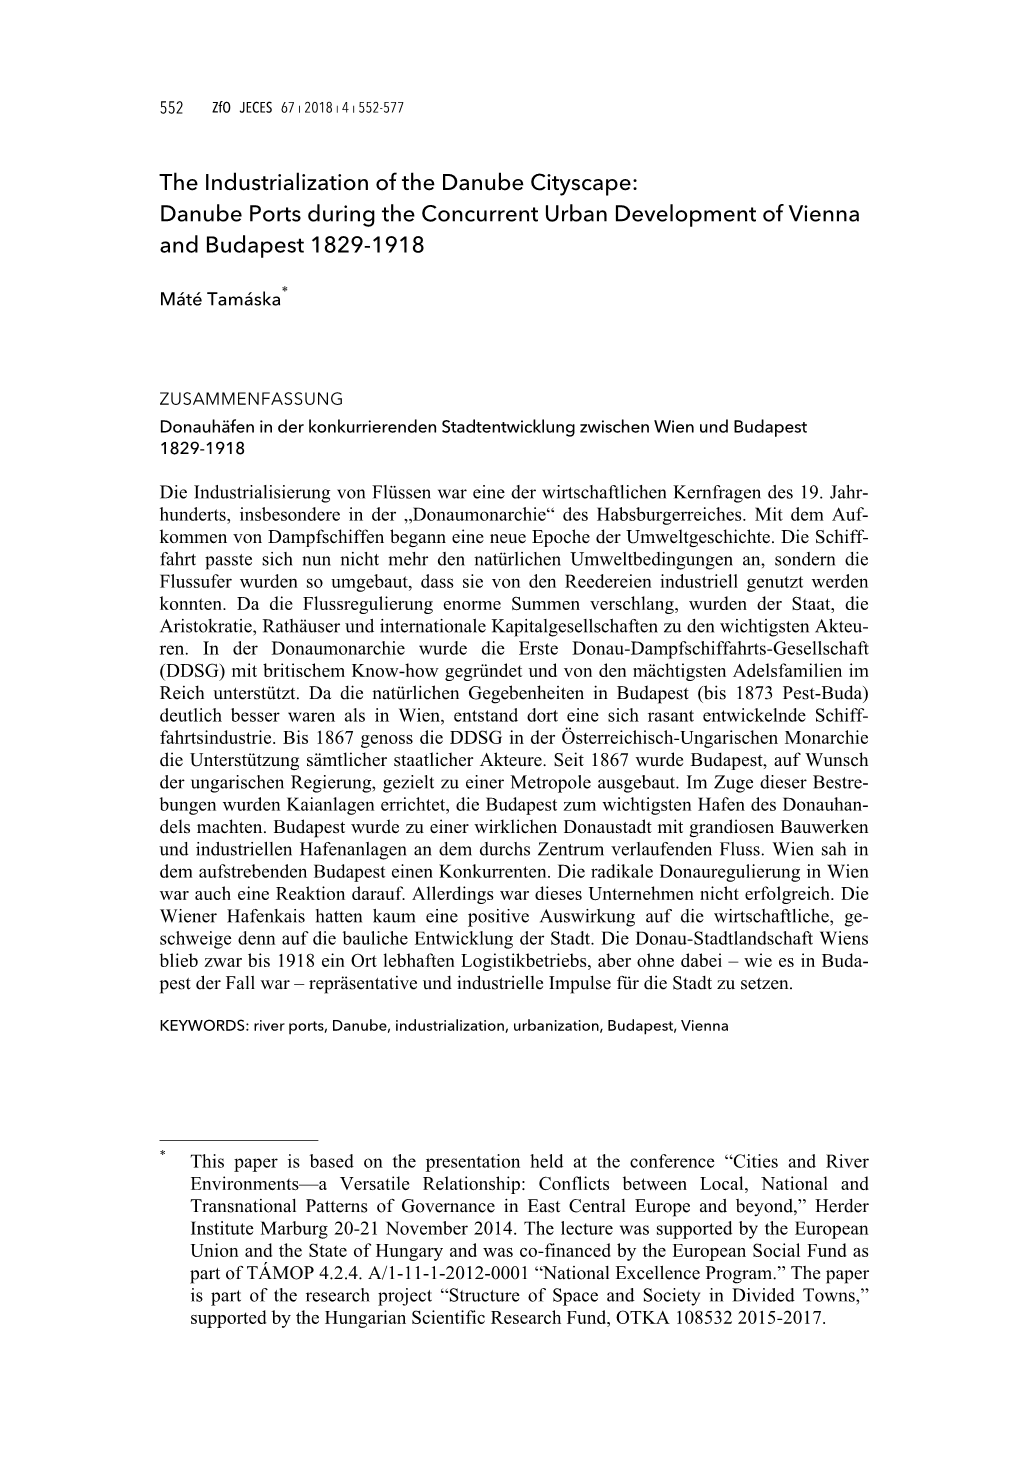 The Industrialization of the Danube Cityscape: Danube Ports During the Concurrent Urban Development of Vienna and Budapest 1829-1918